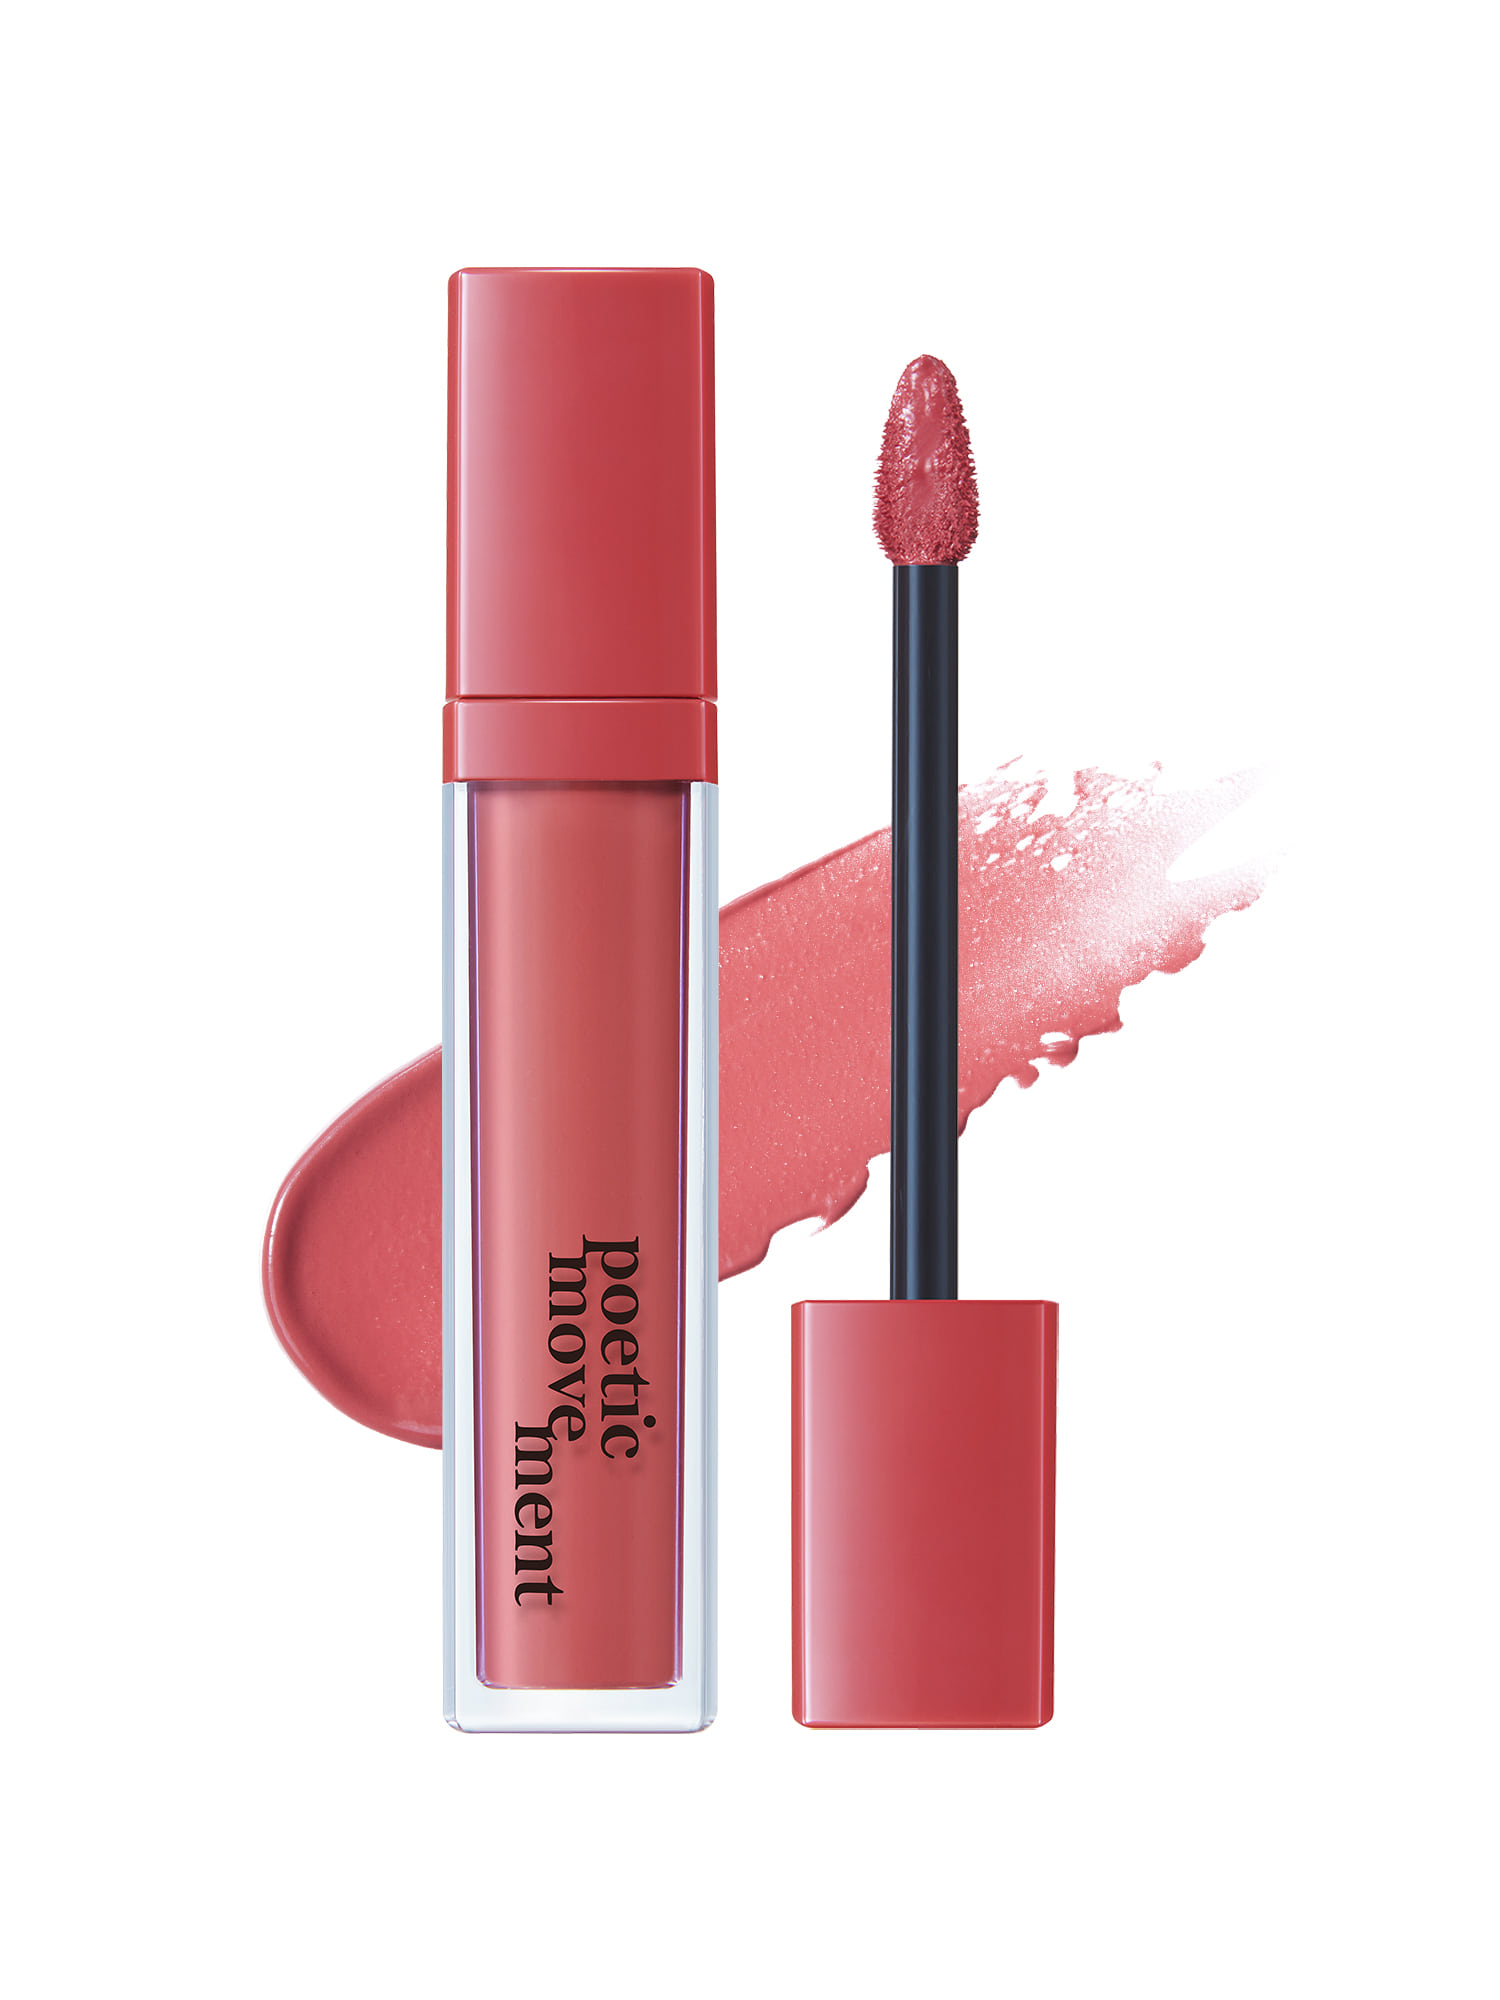 Poetical Lip Tint-3# Composition